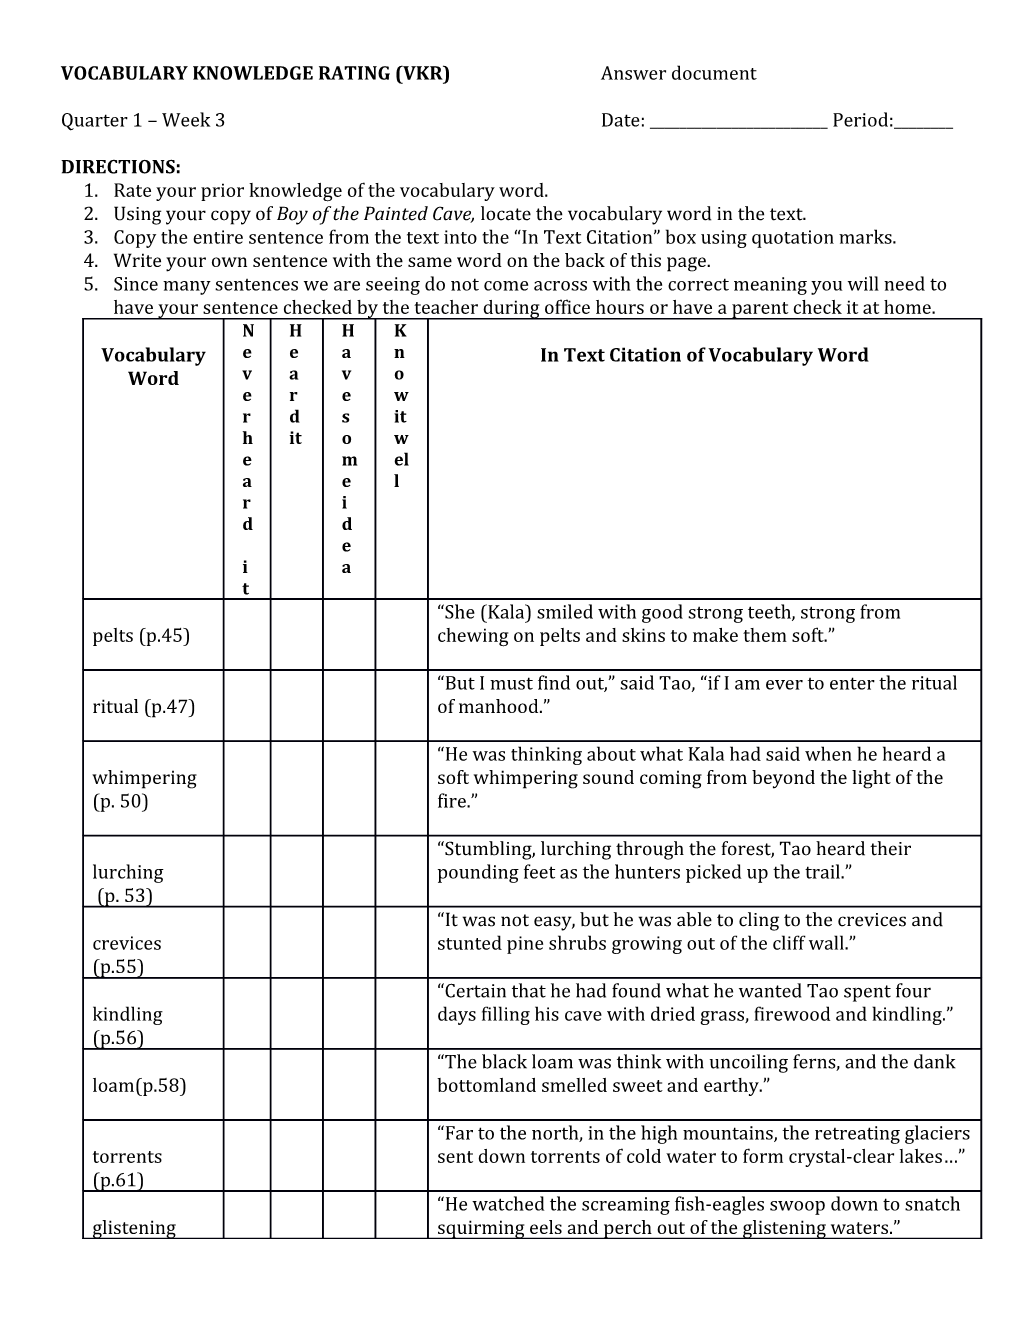 VOCABULARY KNOWLEDGE RATING (VKR) Answer Document